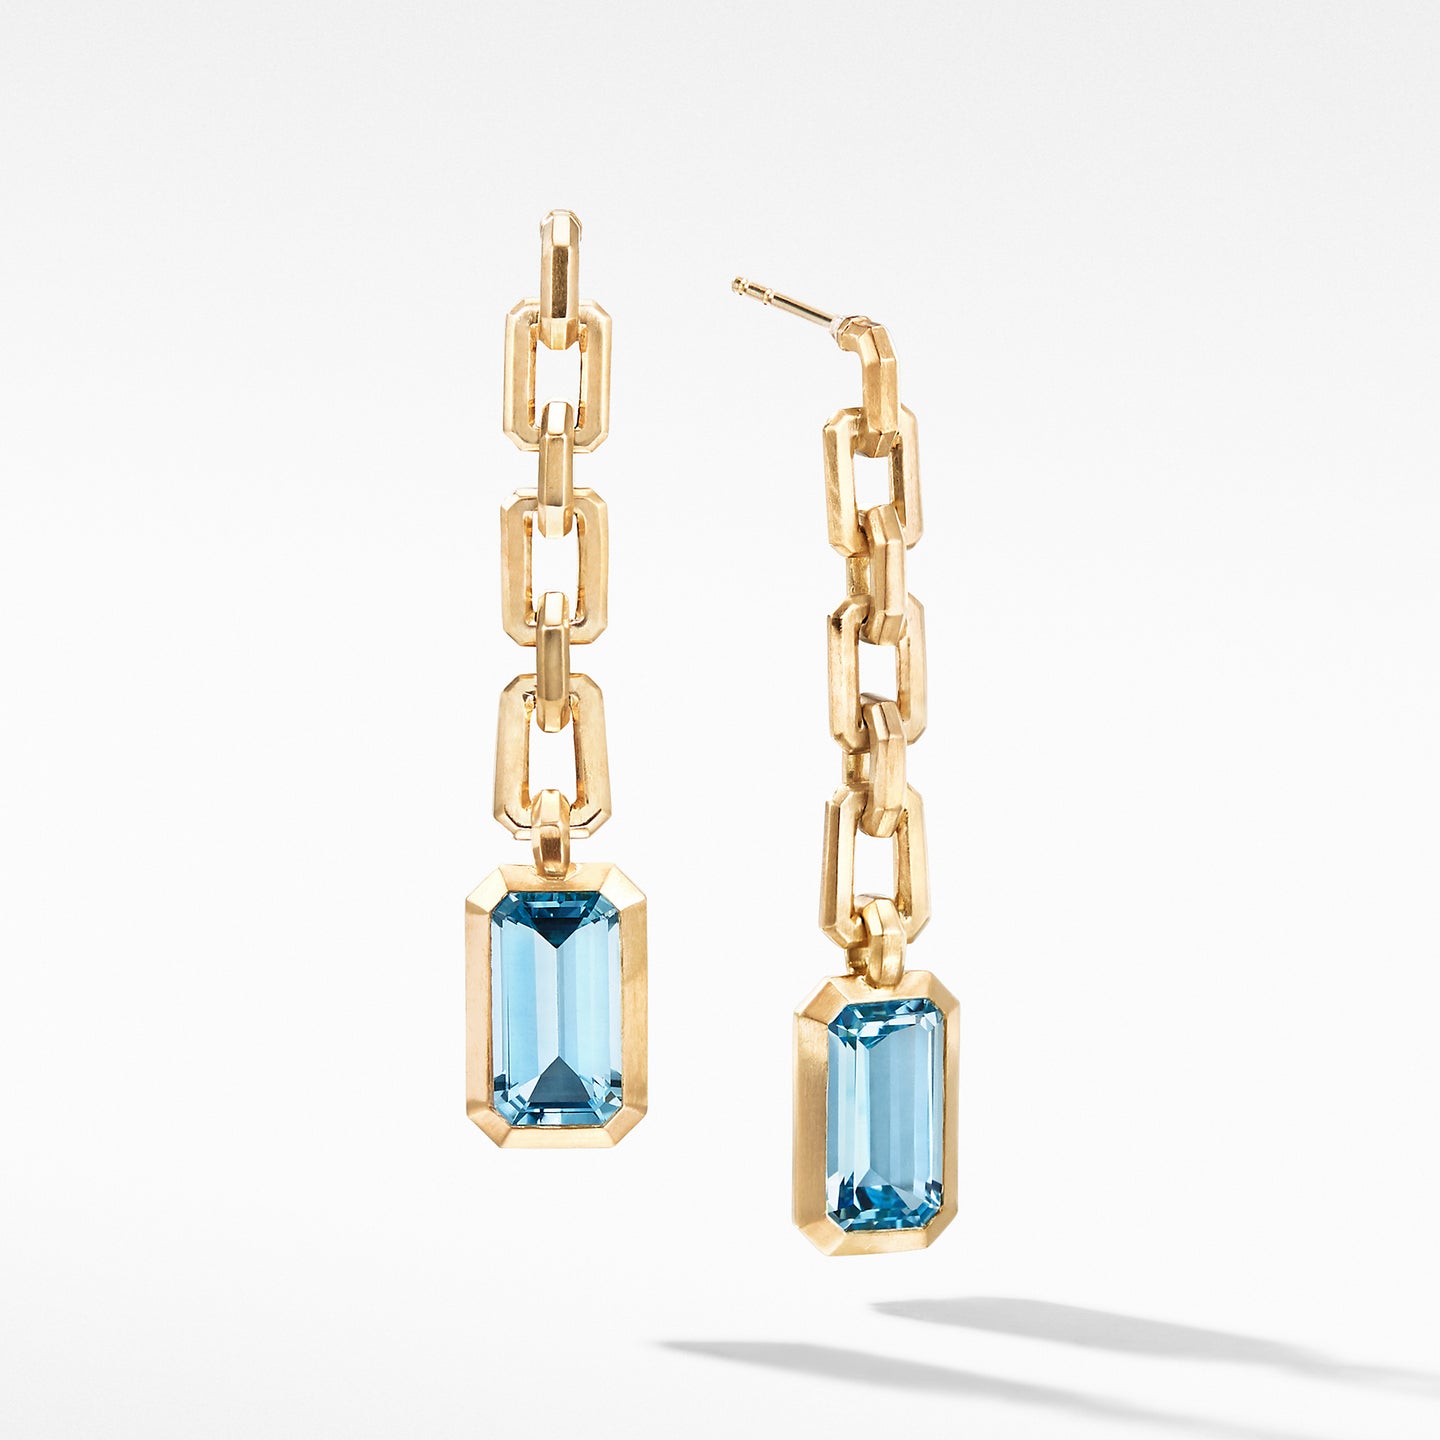 Novella Chain Drop Earrings in 18K Yellow Gold with Blue Topaz